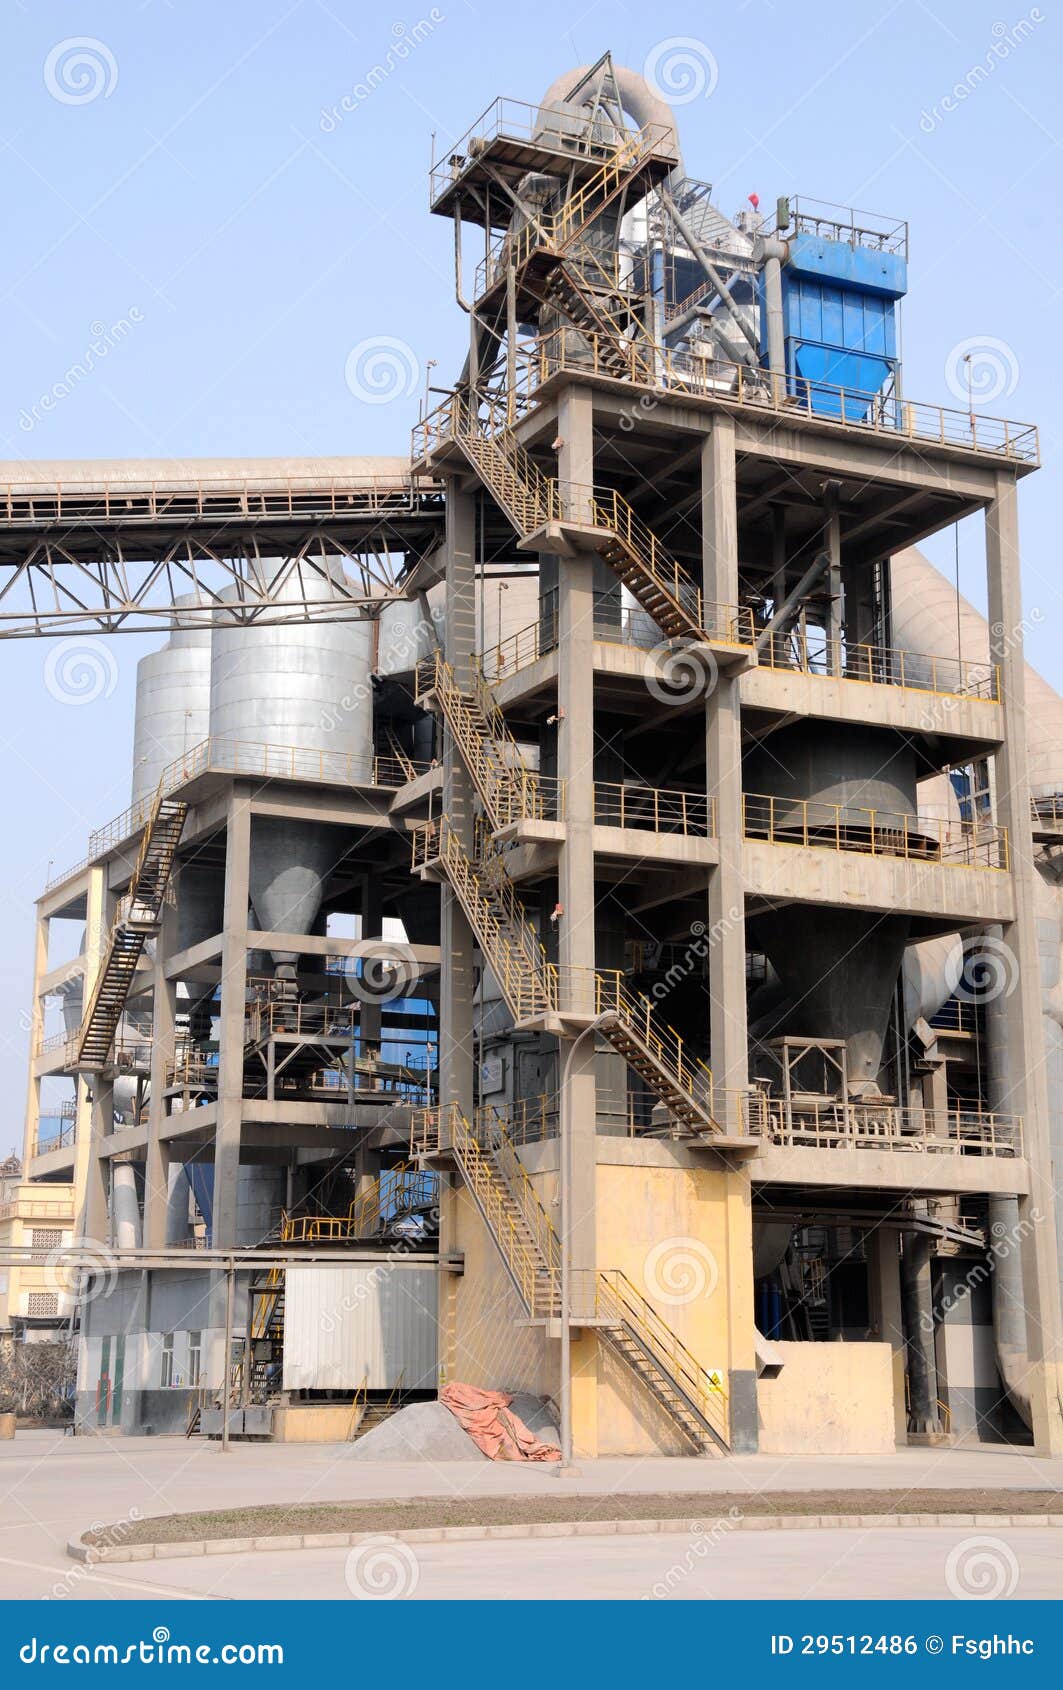 vertical mill and circulating air separator with y